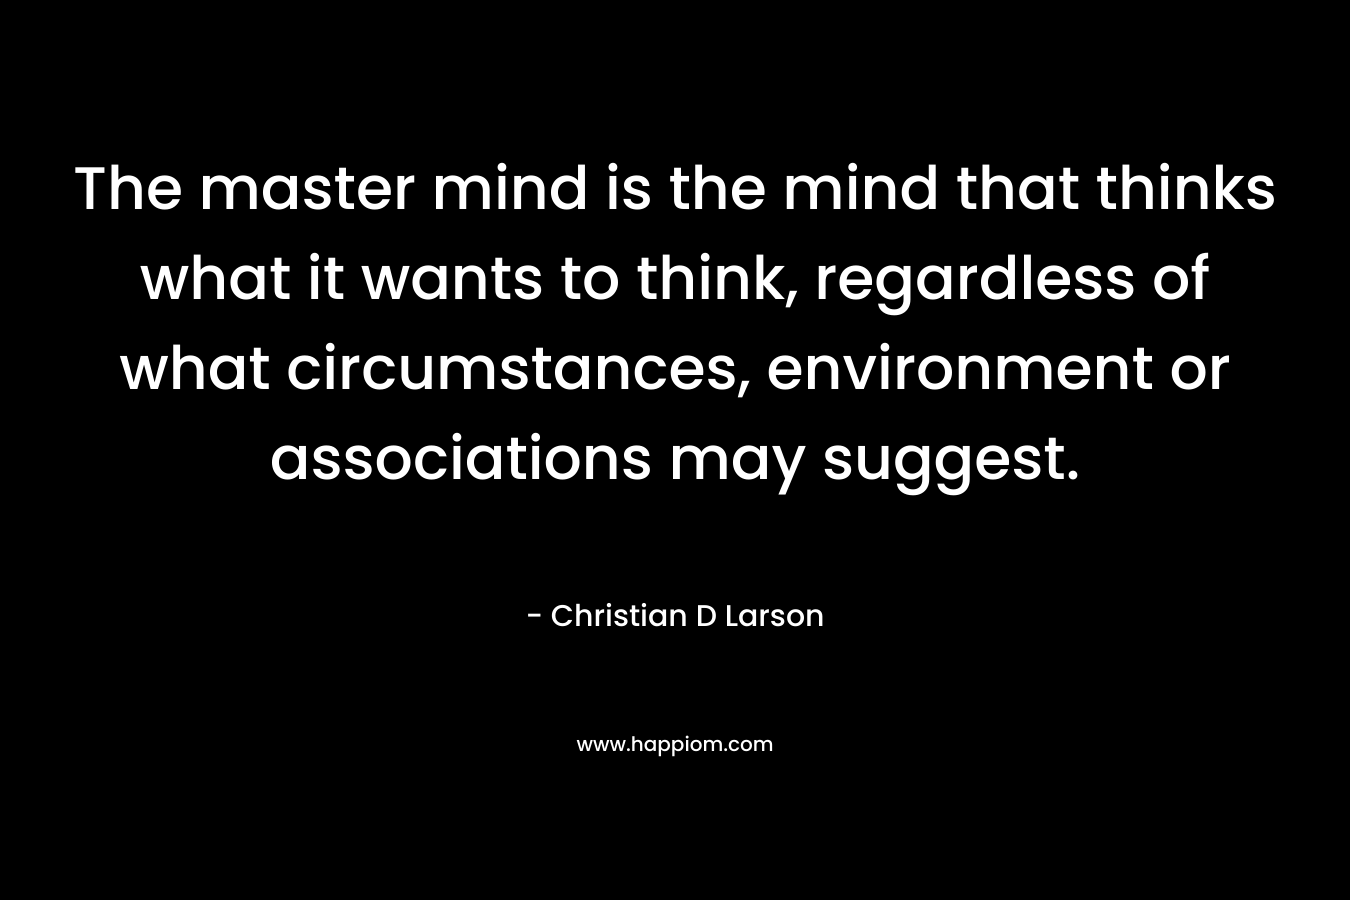 The master mind is the mind that thinks what it wants to think, regardless of what circumstances, environment or associations may suggest.